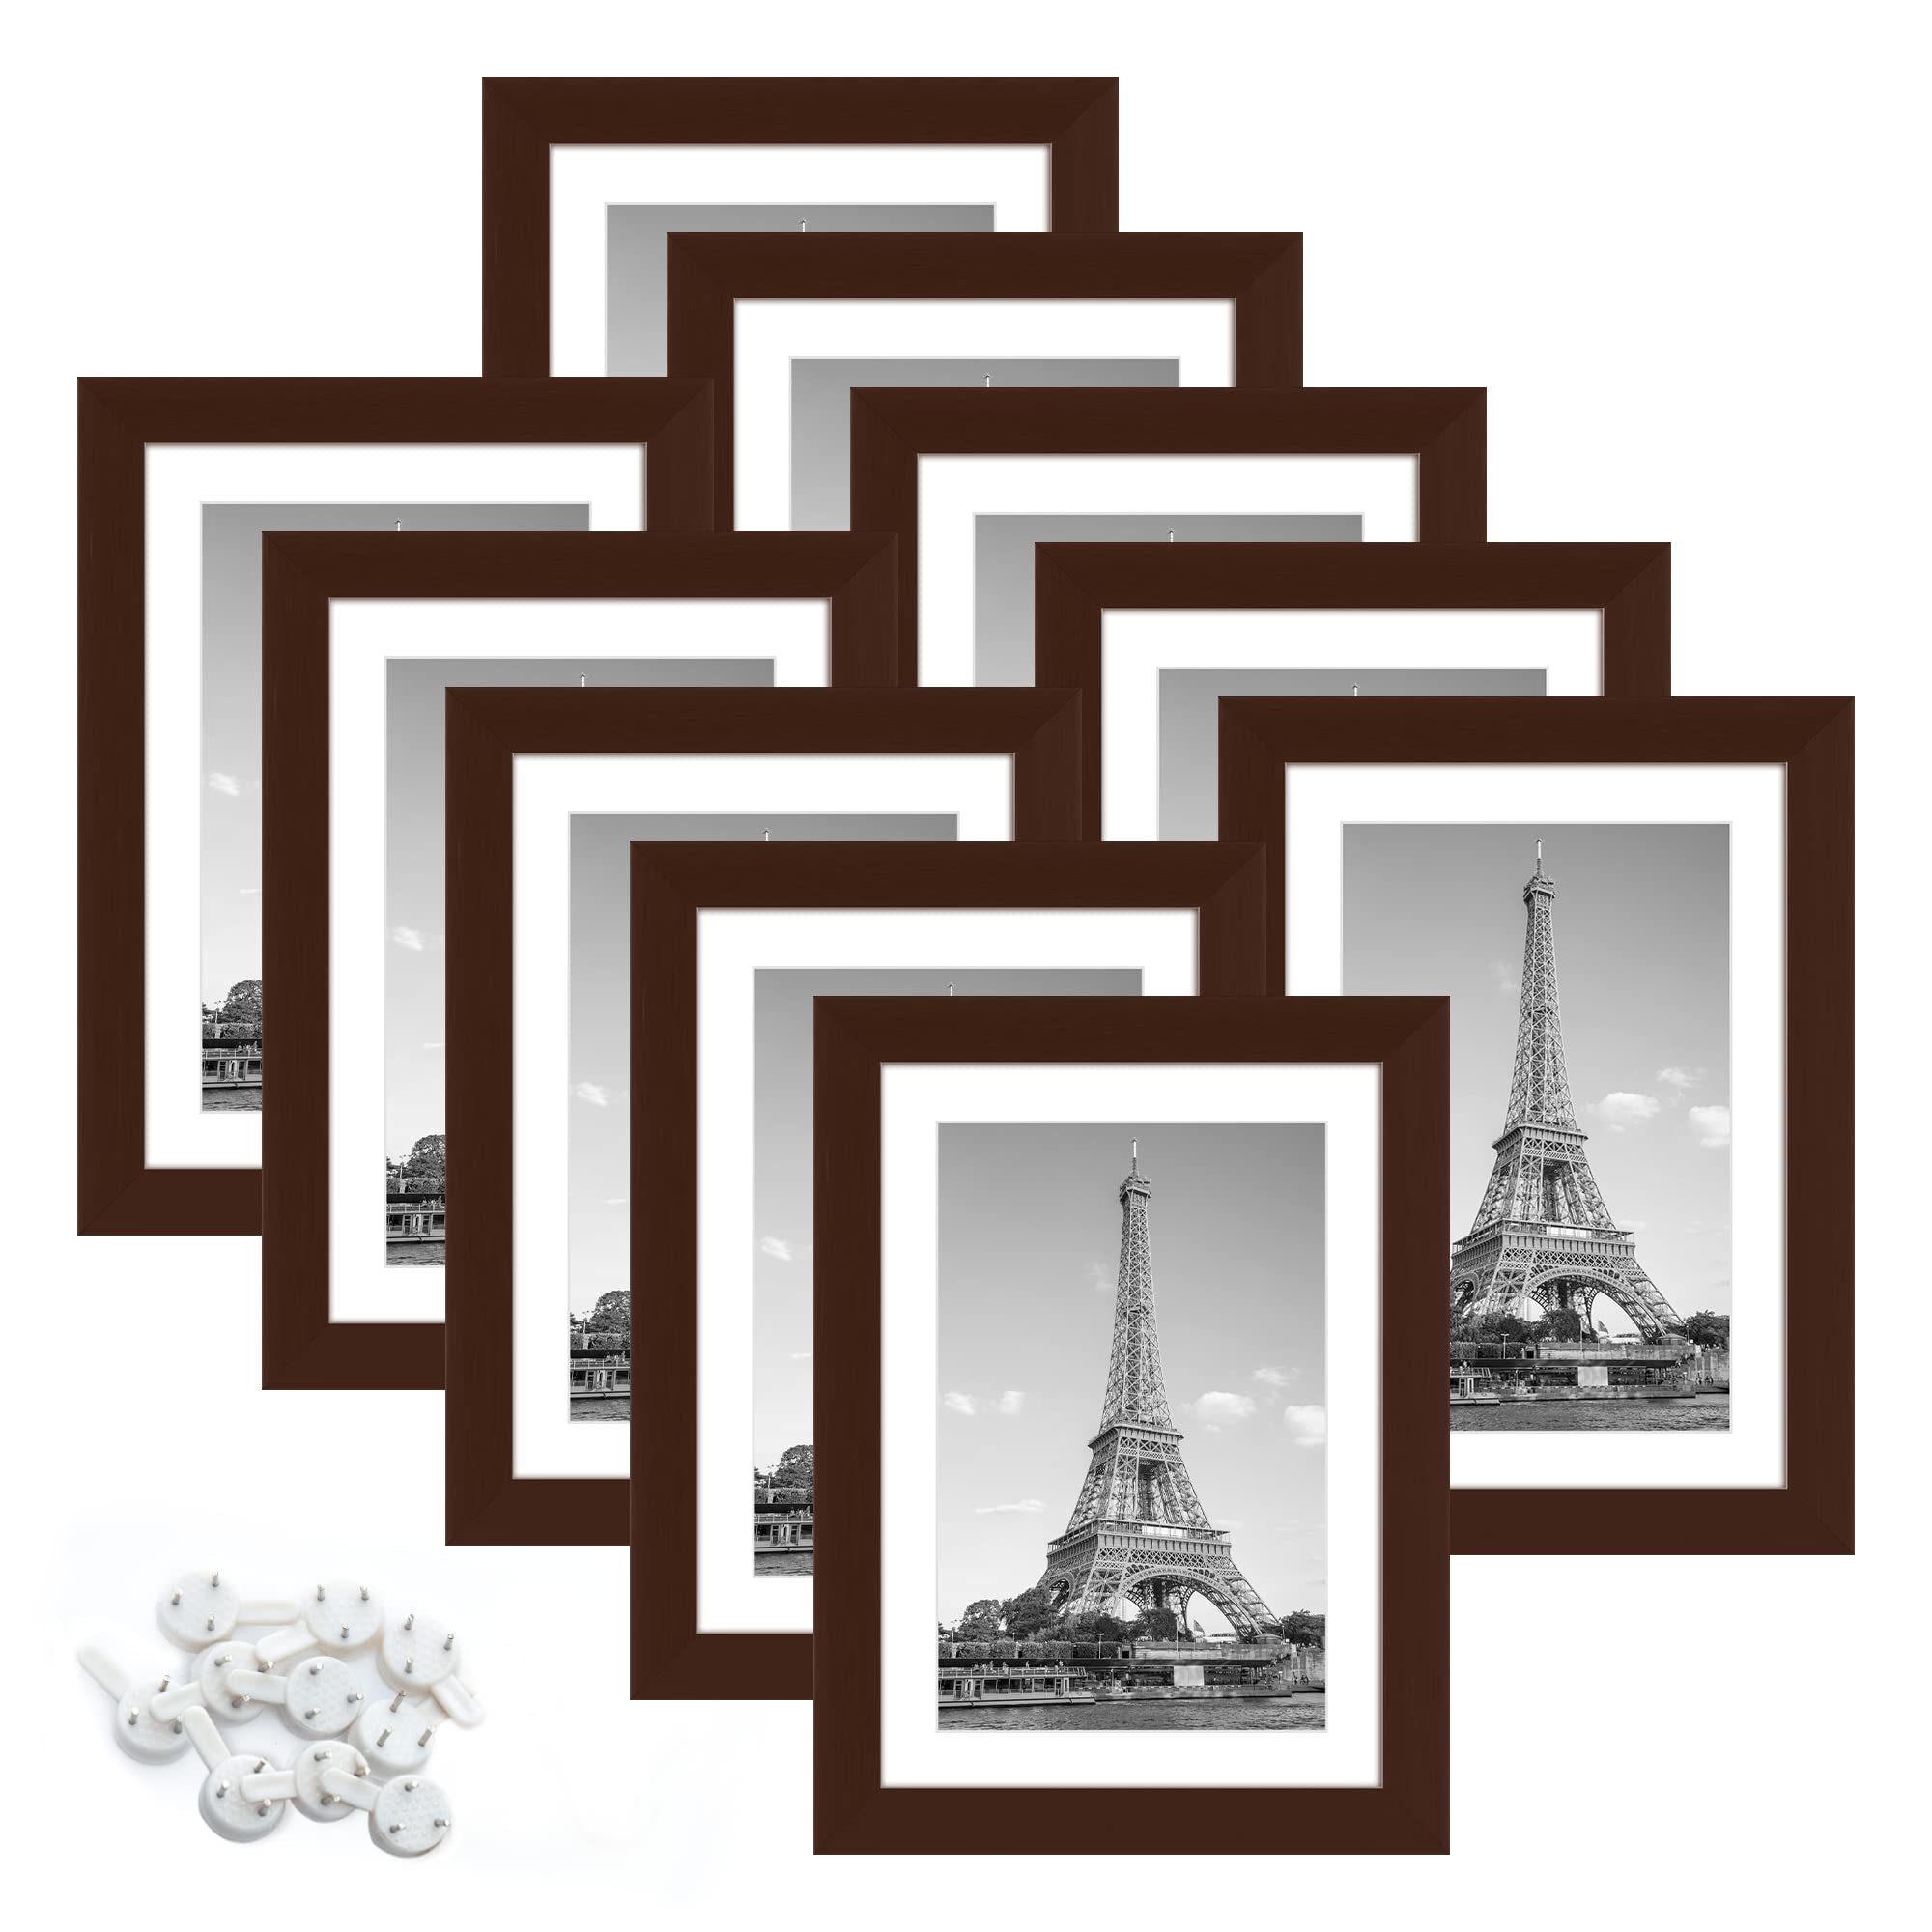 8x10 Picture Frame Set of 3, Matted to 5x7 Picture with Mat or Multi 8x10  Photo without Mat, Wall Hanging or Tabletop Display, Sliver